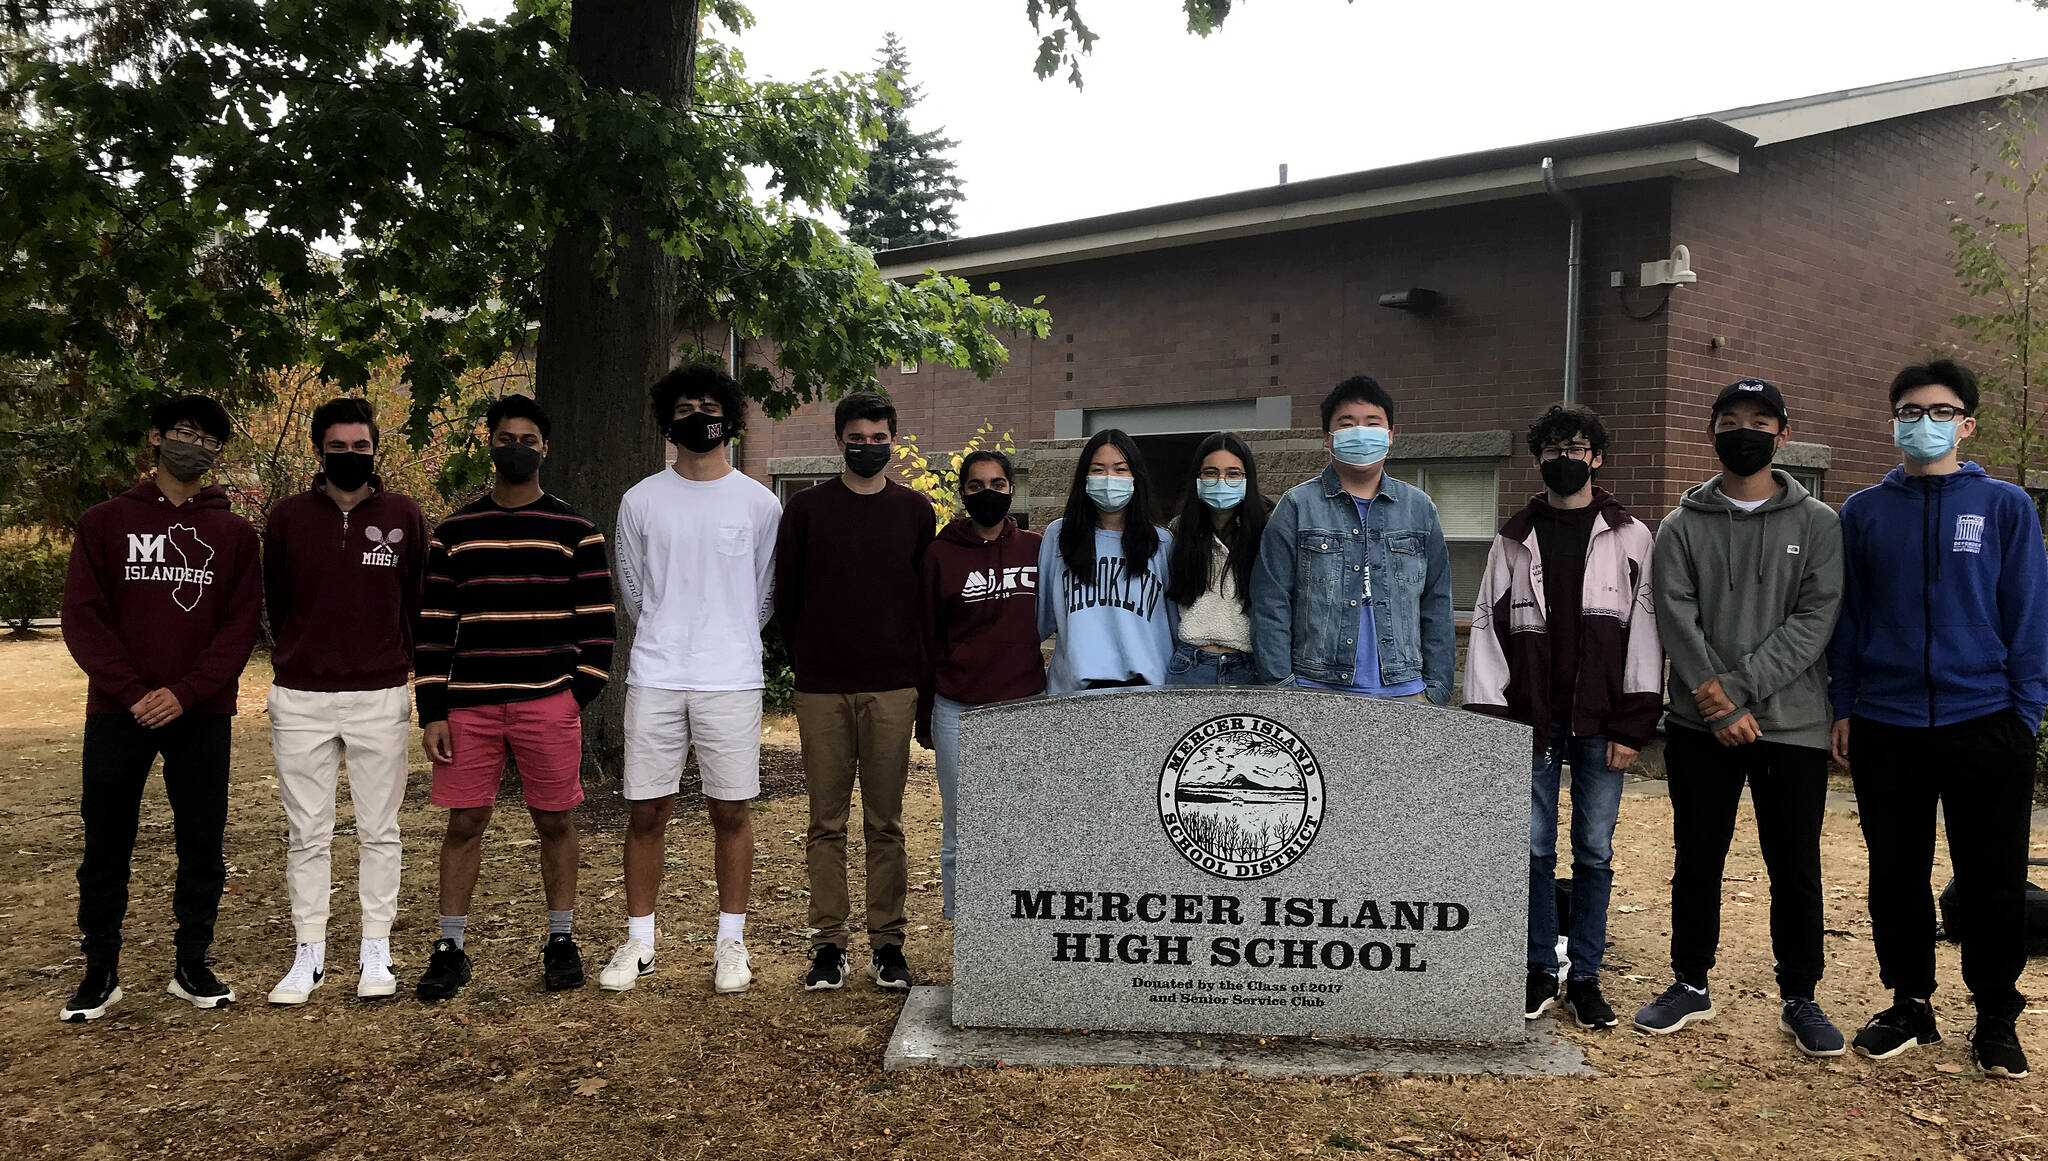 Pictured are 12 of the 13 Mercer Island High School seniors who have been named semifinalists in the National Merit Scholarship Program. Photo courtesy of the Mercer Island School District